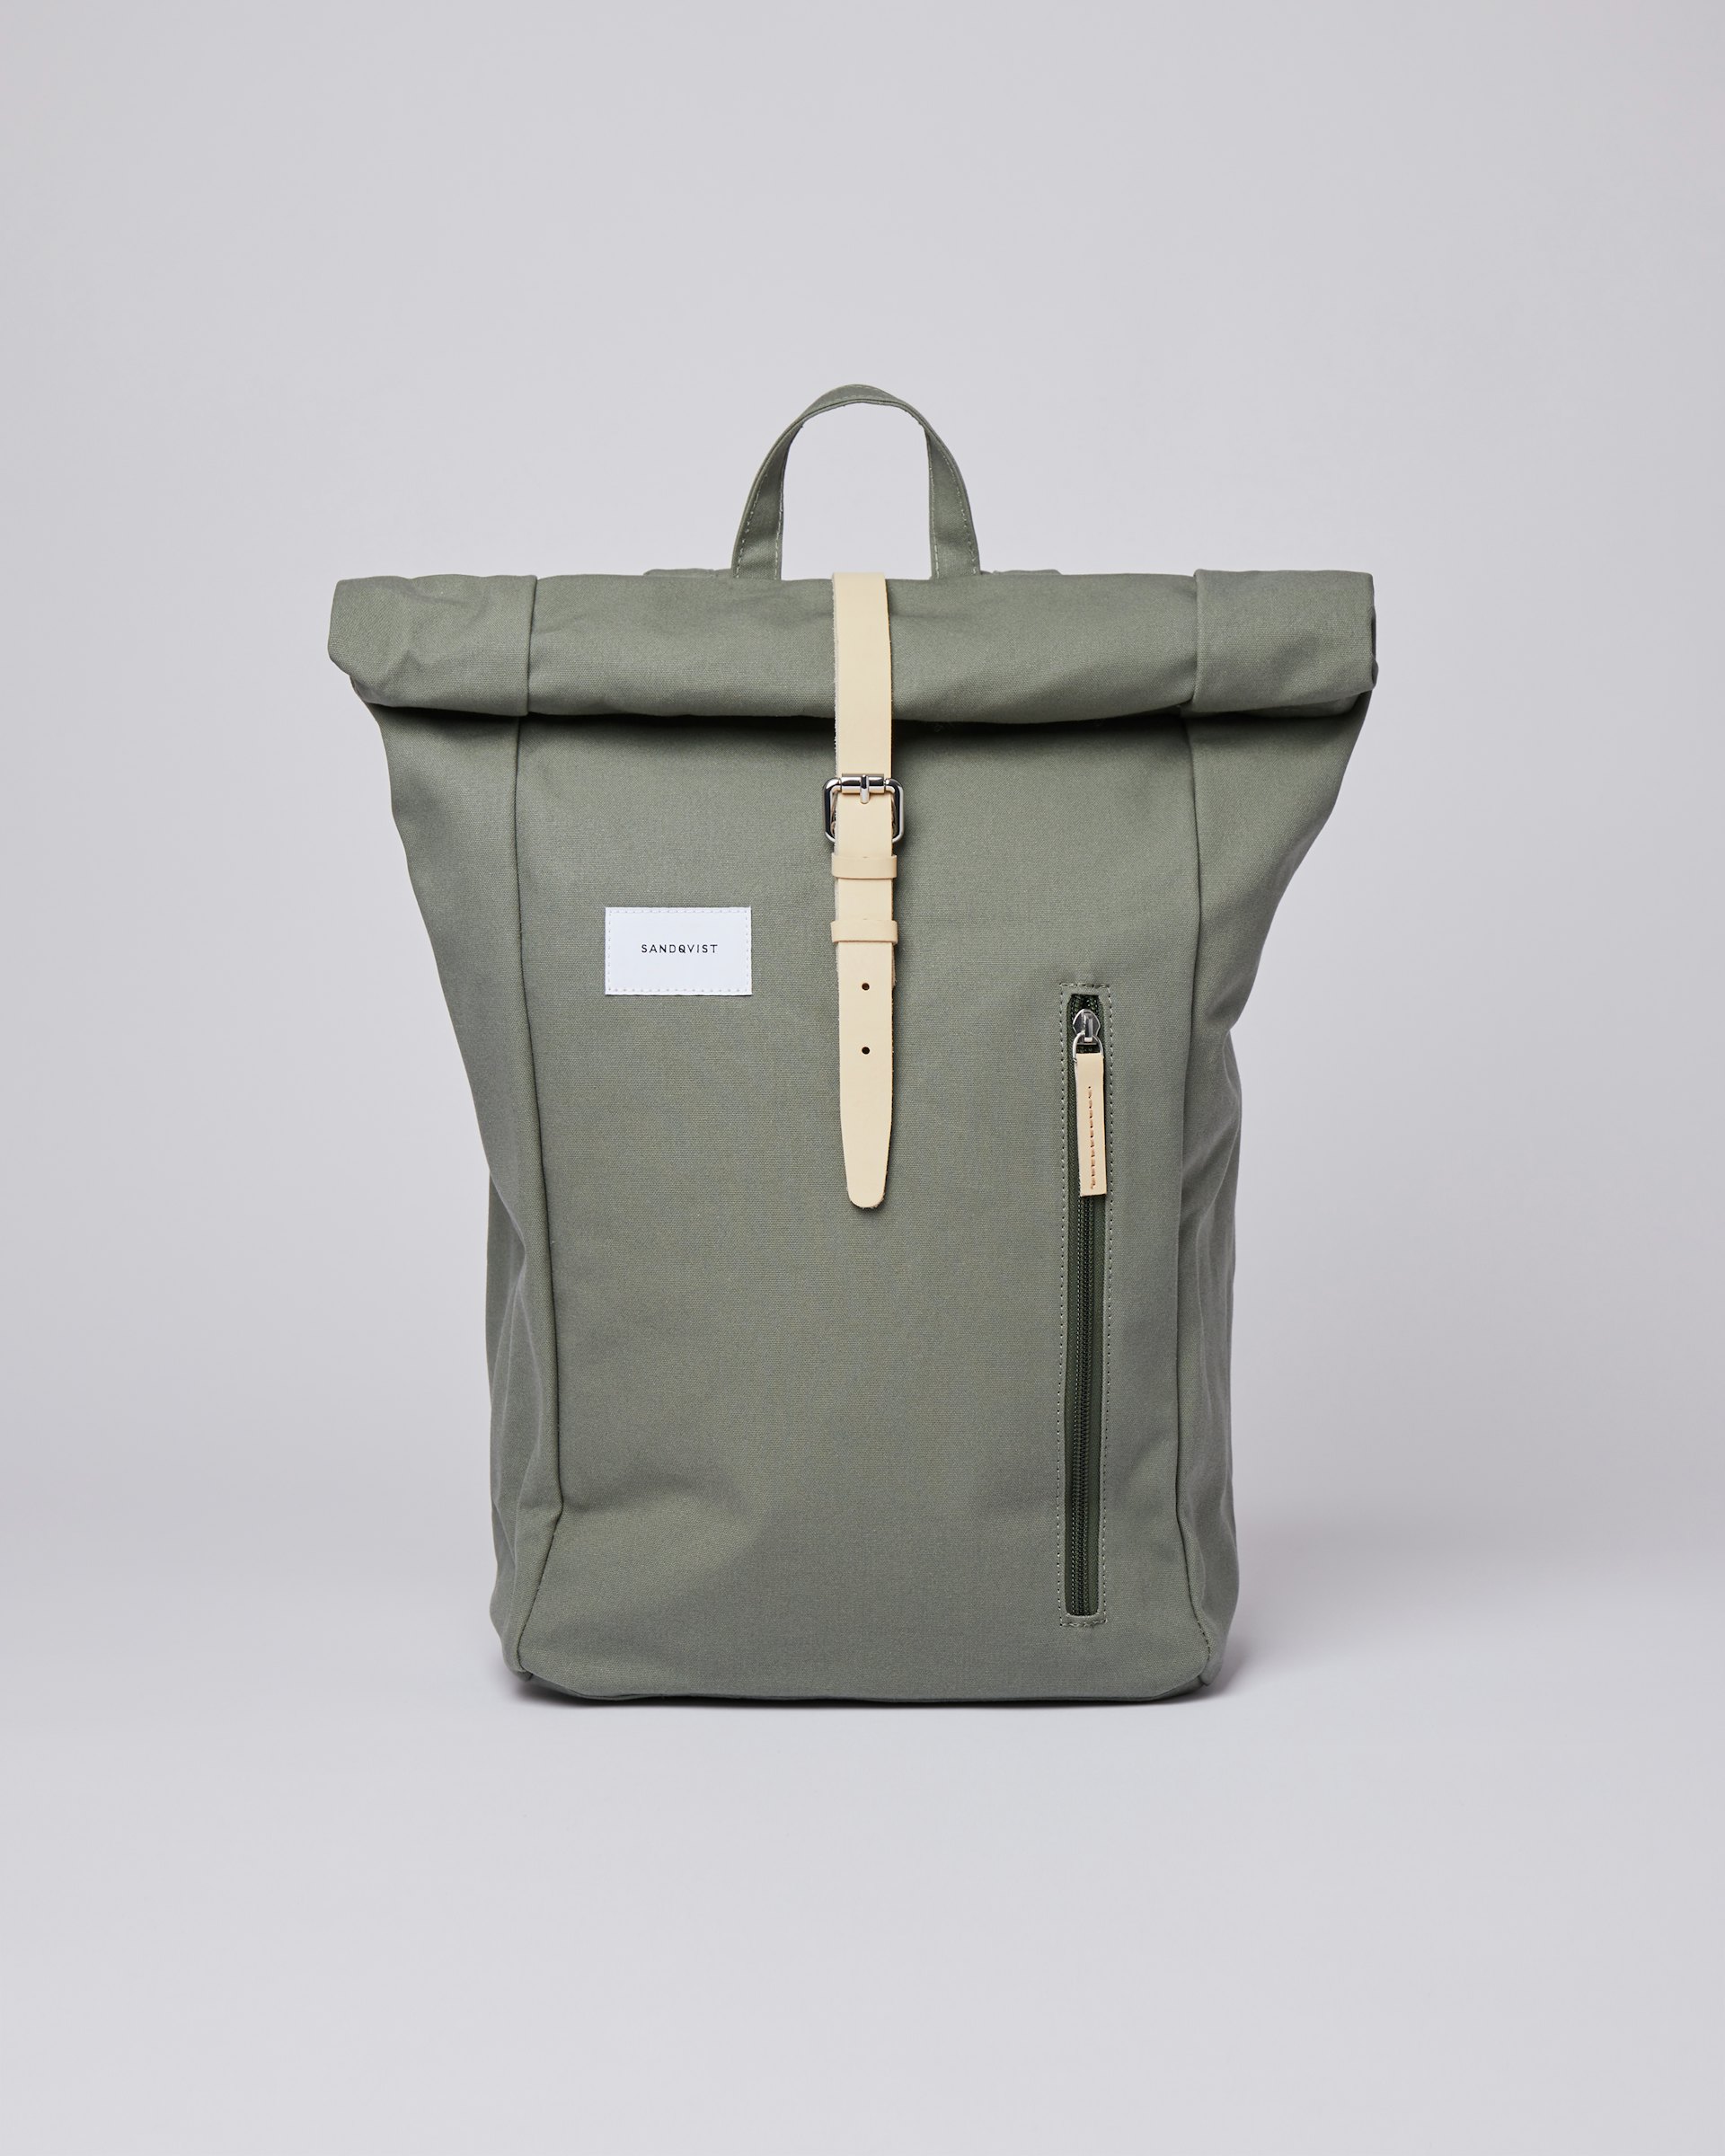 Dante belongs to the category Backpacks and is in color dusty green (1 of 5)